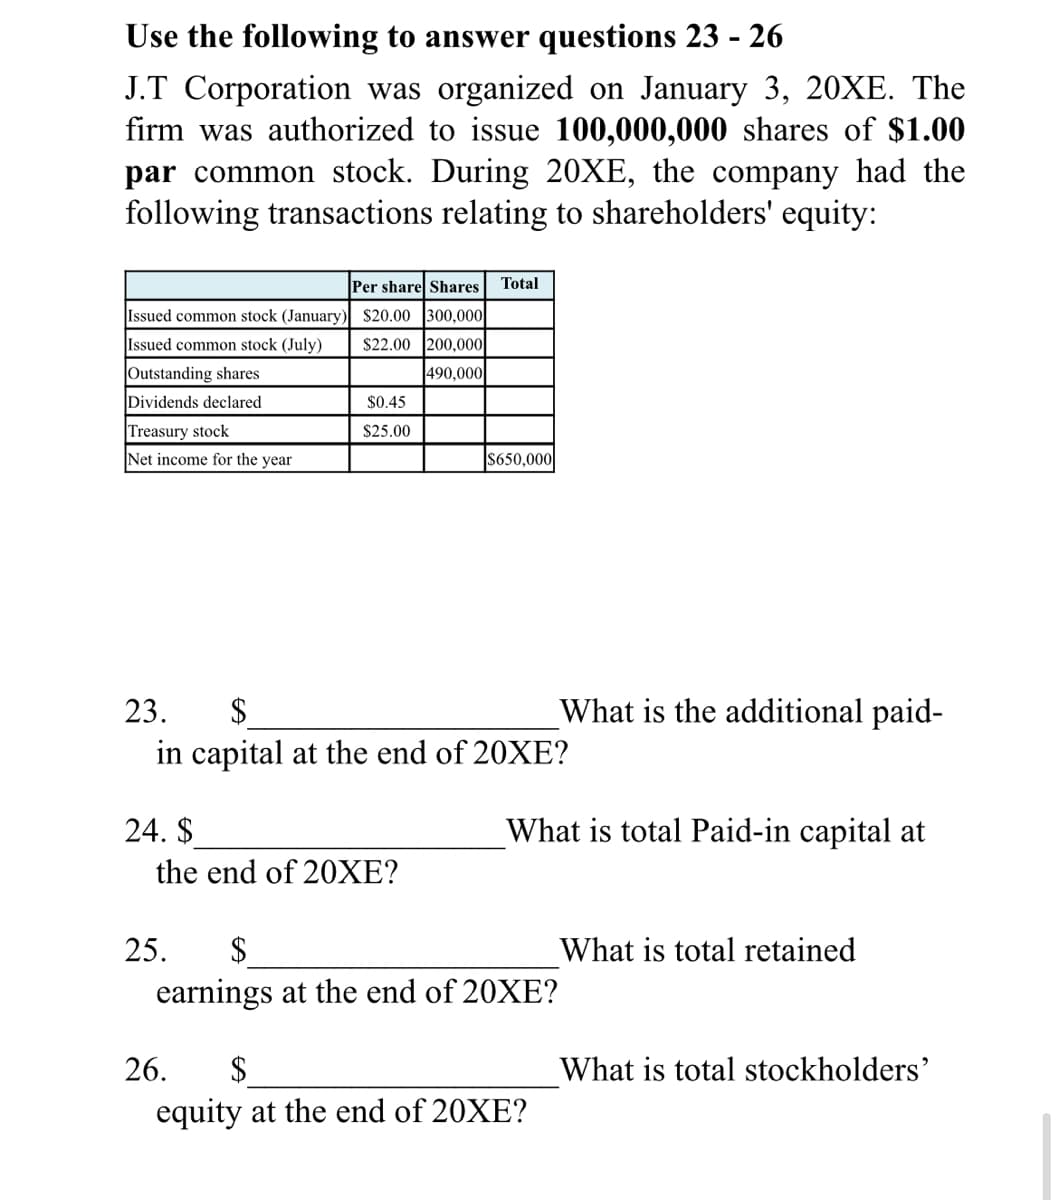 Use the following to answer questions 23 - 26
J.T Corporation was organized on January 3, 20XE. The
firm was authorized to issue 100,000,000 shares of $1.00
par common stock. During 20XE, the company had the
following transactions relating to shareholders' equity:
Per share Shares
Total
Issued common stock (January) $20.00 300,000
Issued common stock (July)
$22.00 200,000
Outstanding shares
Dividends declared
|490,000
$0.45
Treasury stock
$25.00
Net income for the year
$650,000
23.
$
What is the additional paid-
in capital at the end of 20XE?
24. $
What is total Paid-in capital at
the end of 20XE?
25.
2$
What is total retained
earnings at the end of 20XE?
26.
$
What is total stockholders'
equity at the end of 20XE?
